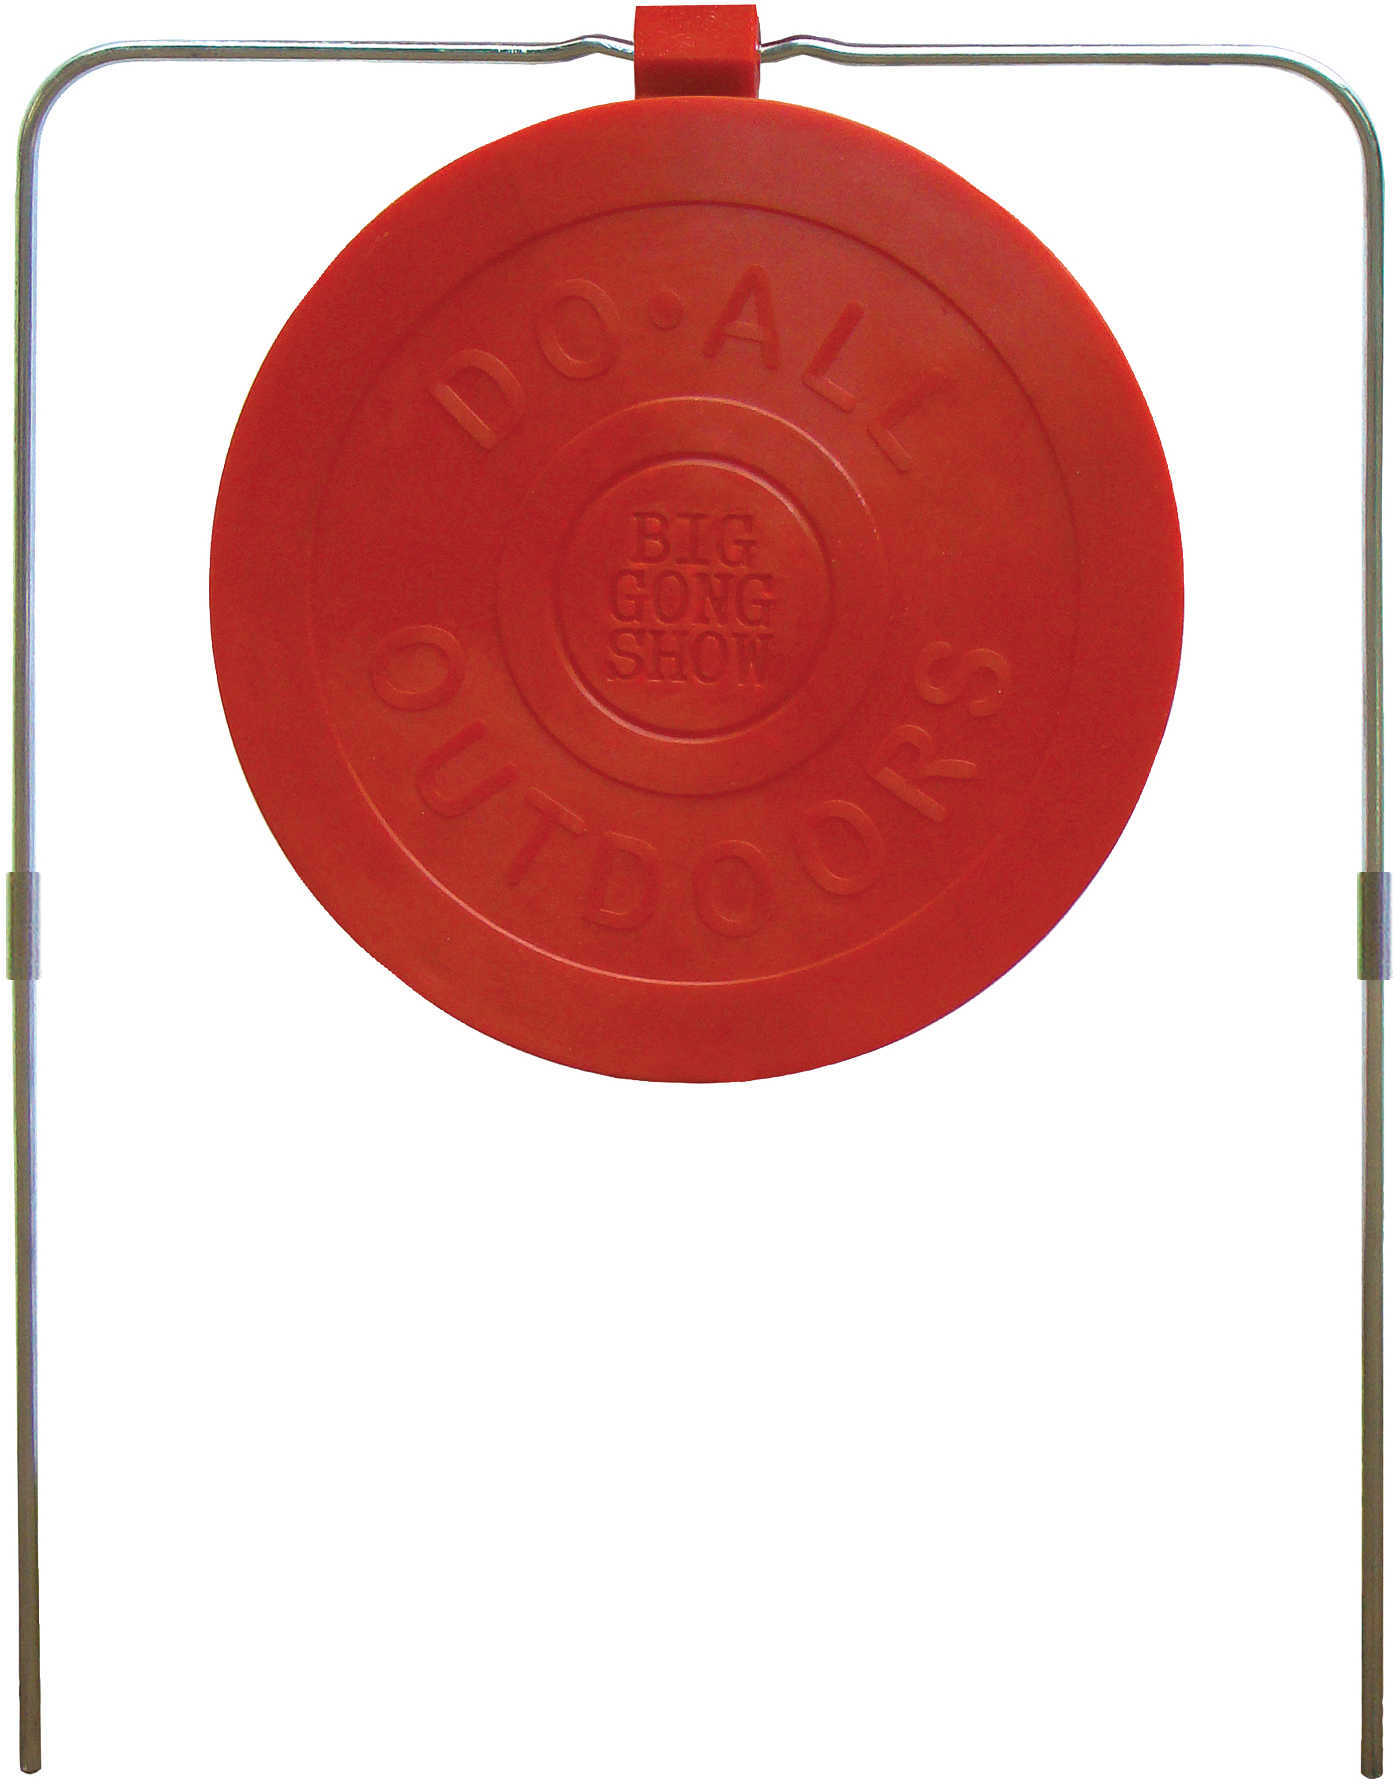 Do All Traps BSG3 Impact Seal Big Gong Show 9" Orange w/Stand